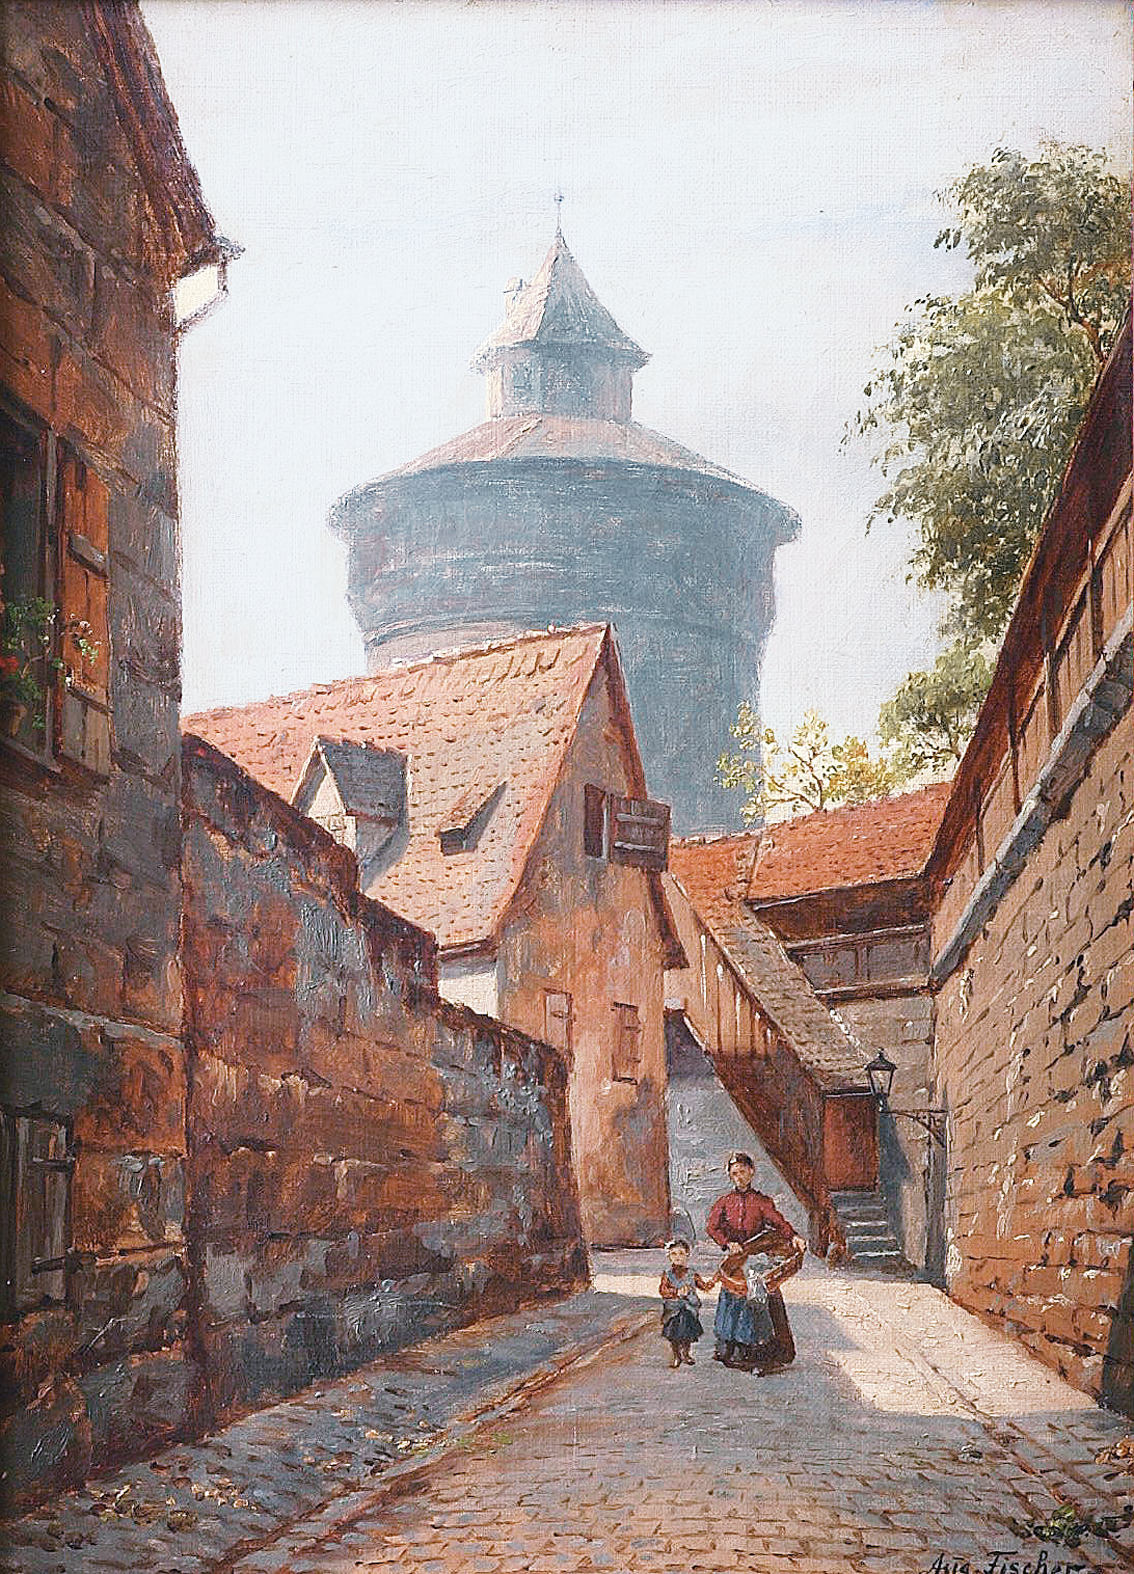 A partial view of Old Nuremberg, with figures